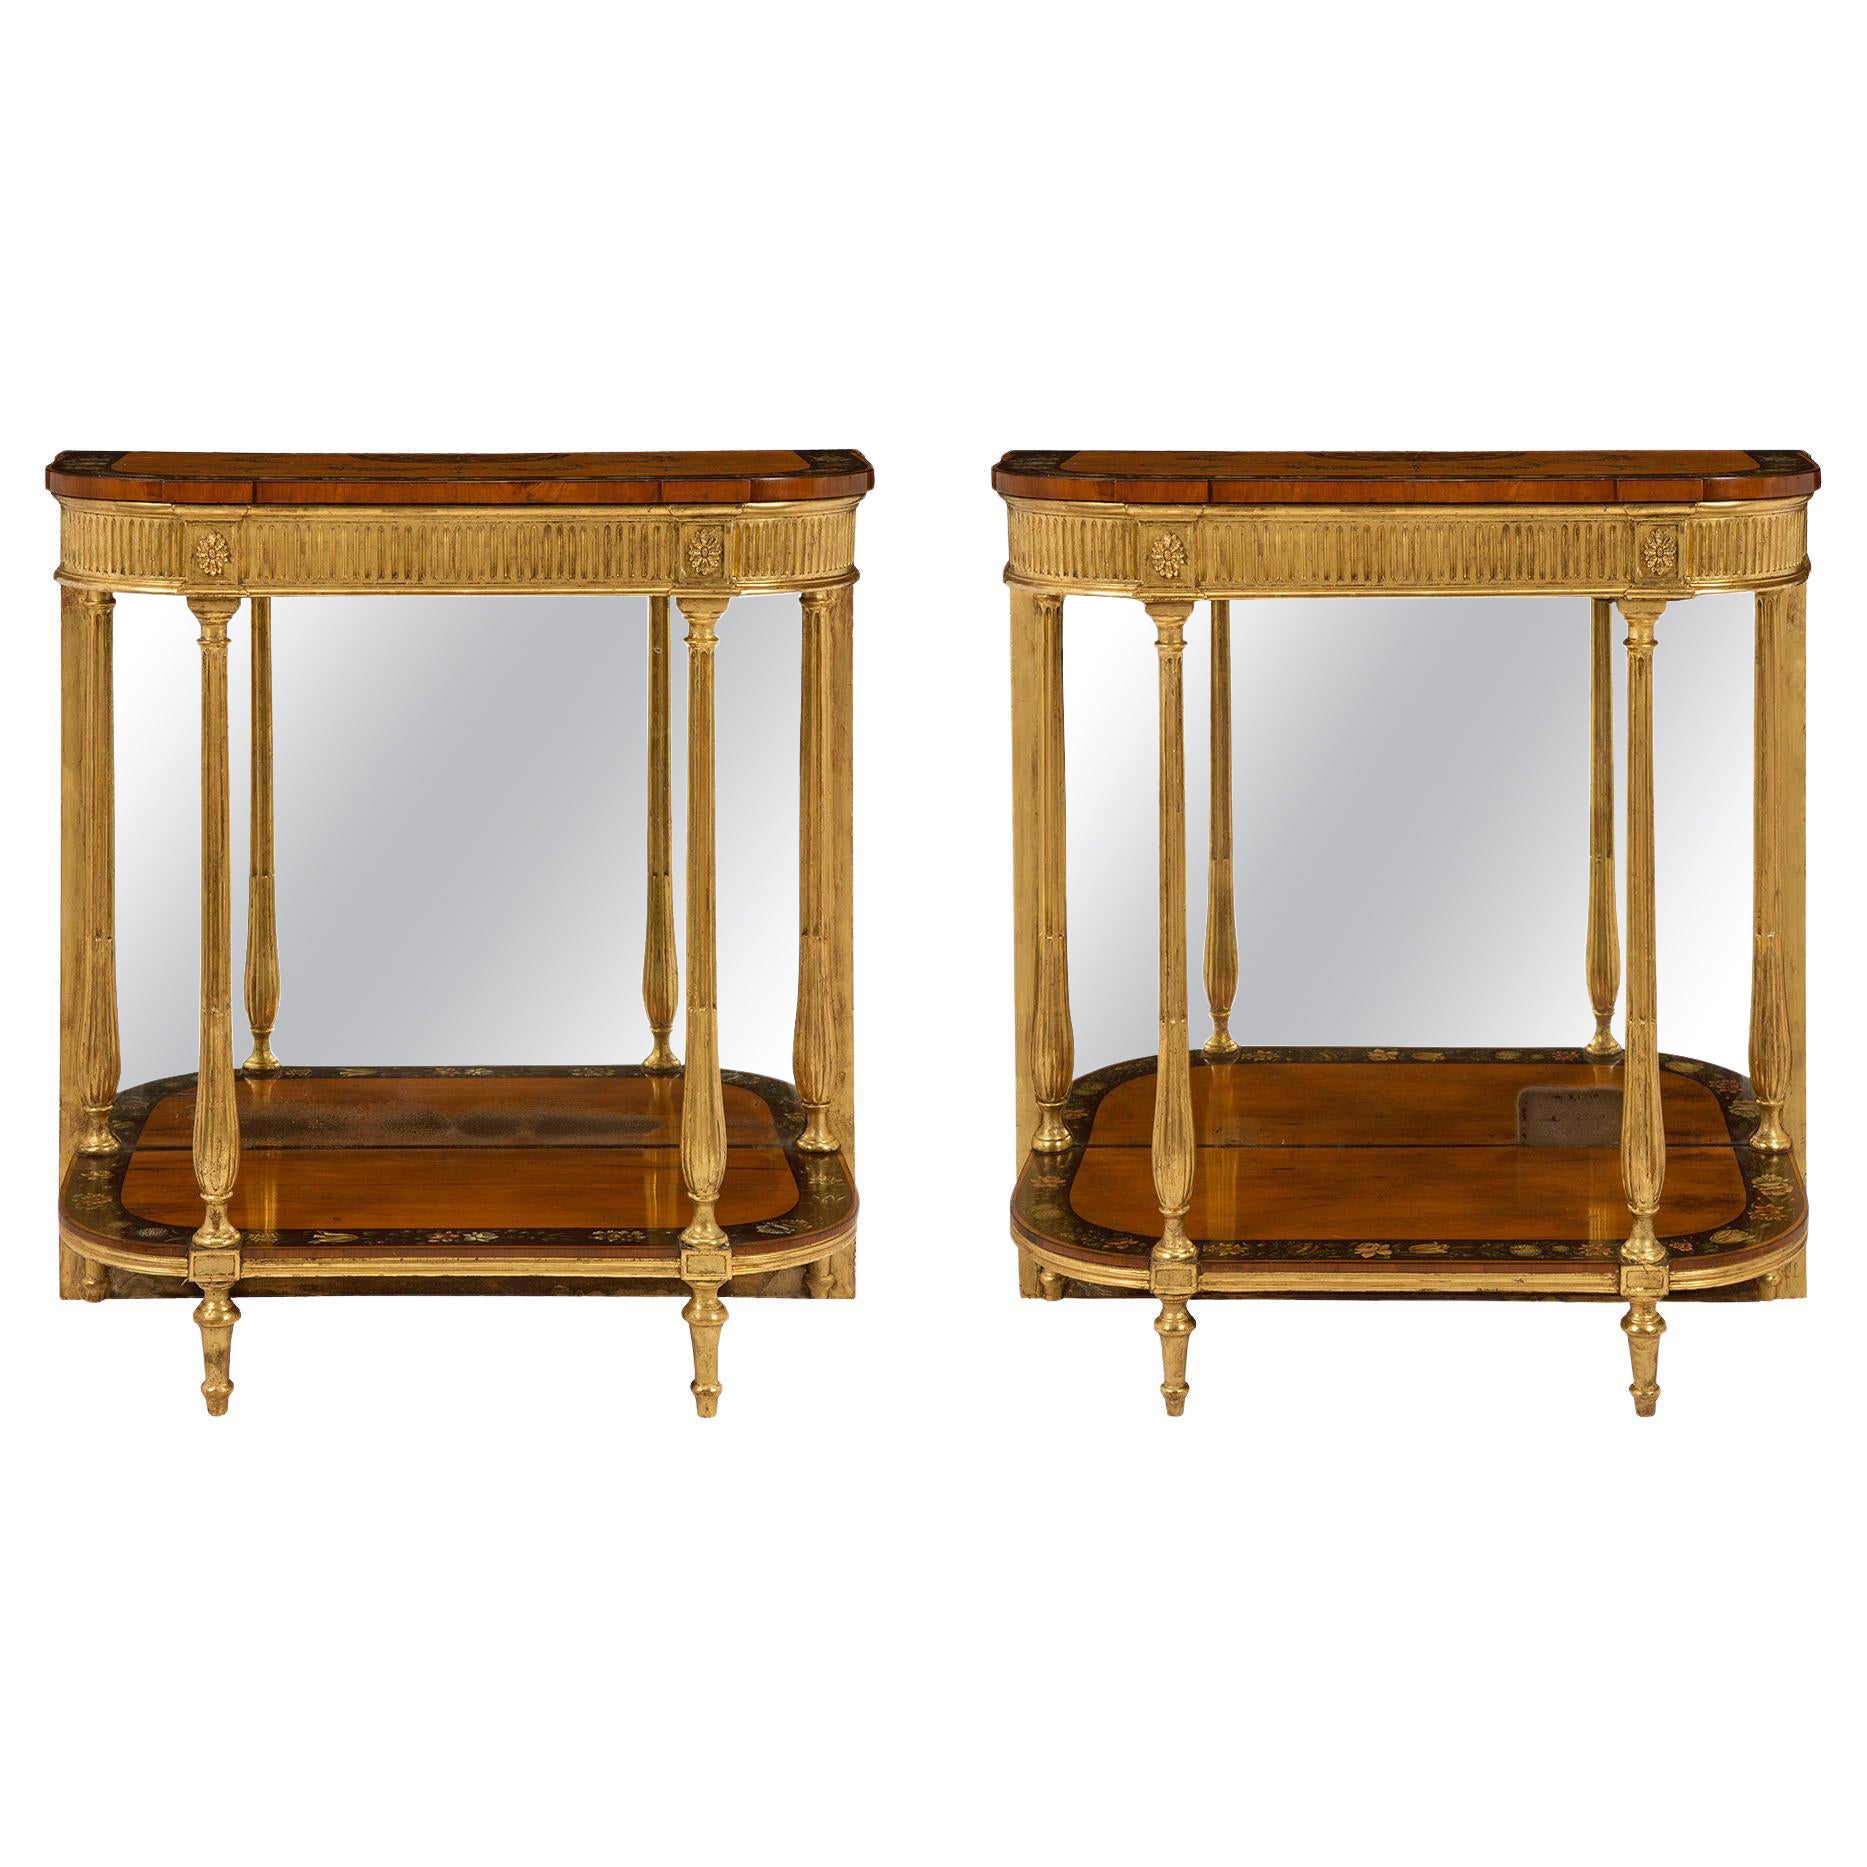 Pair of Early 19th Century Adams Style Console Tables For Sale